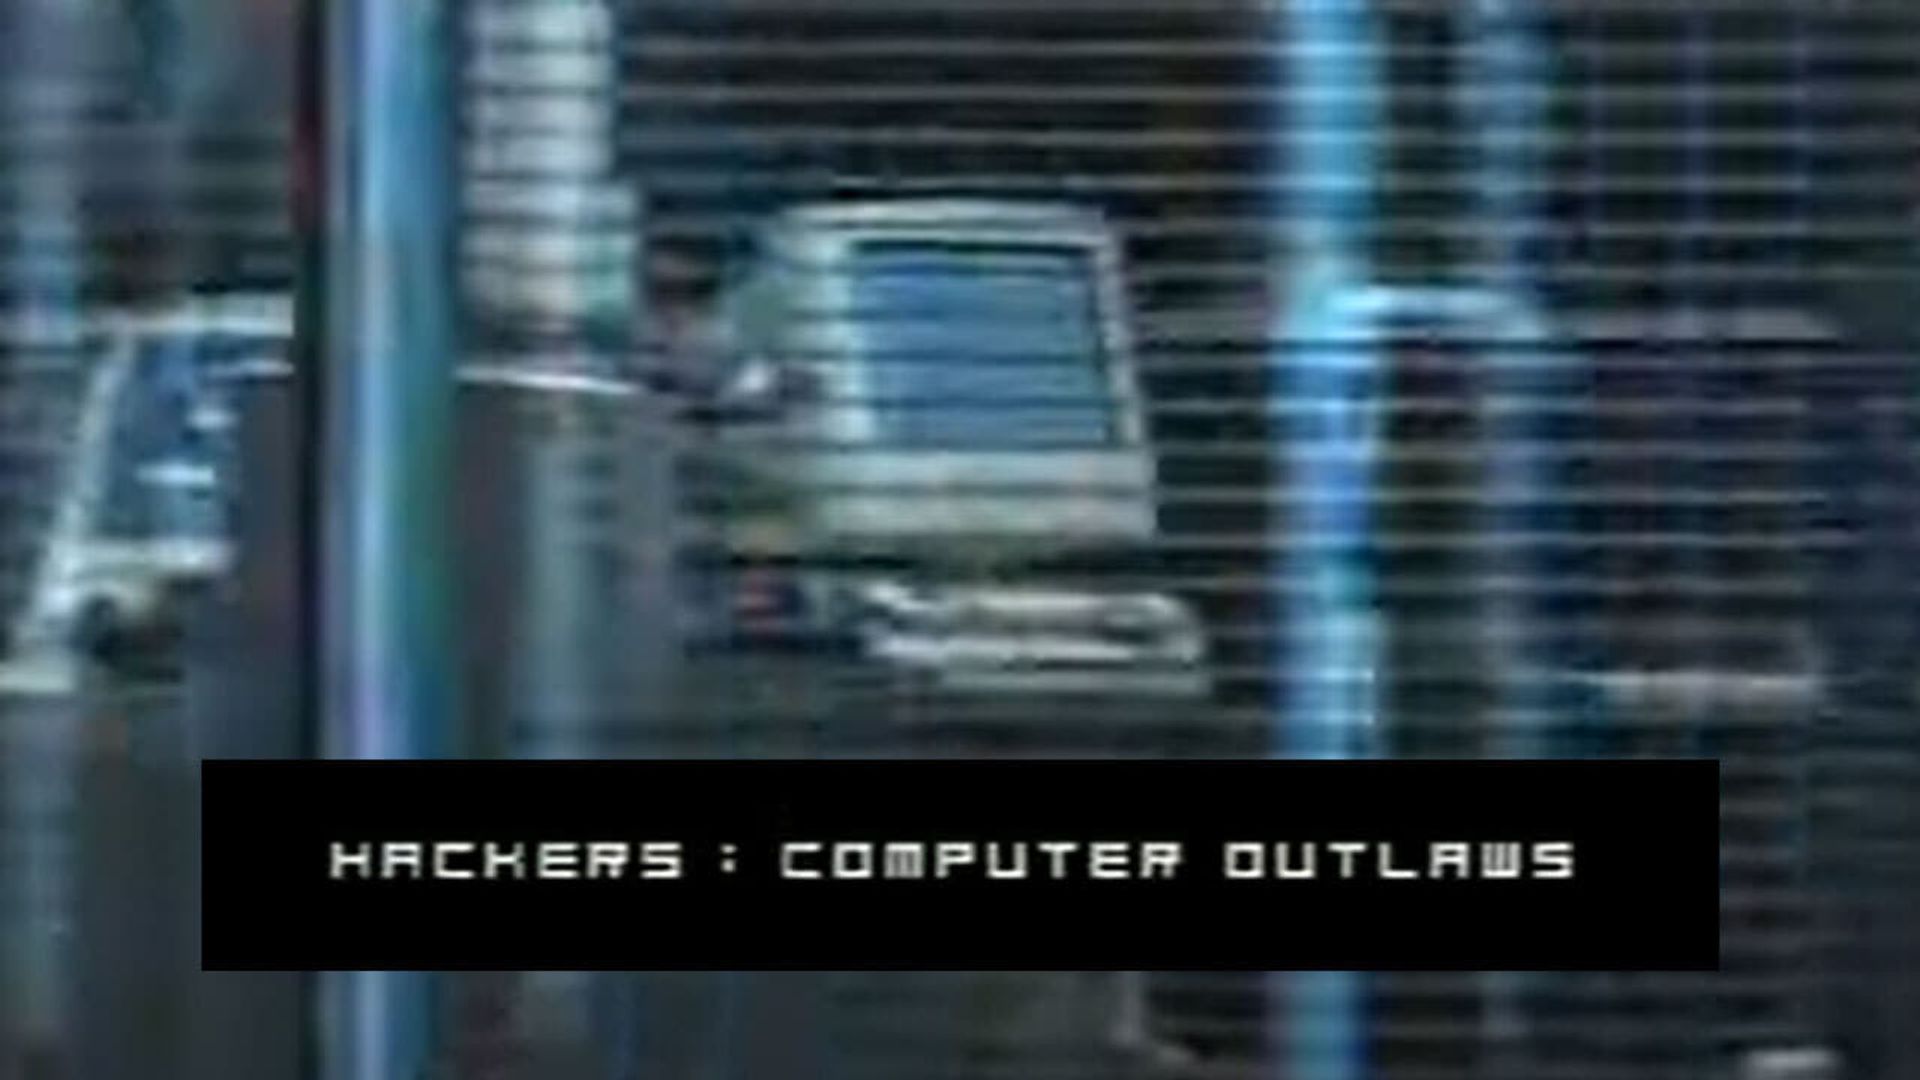 Hackers Computer Outlaws background